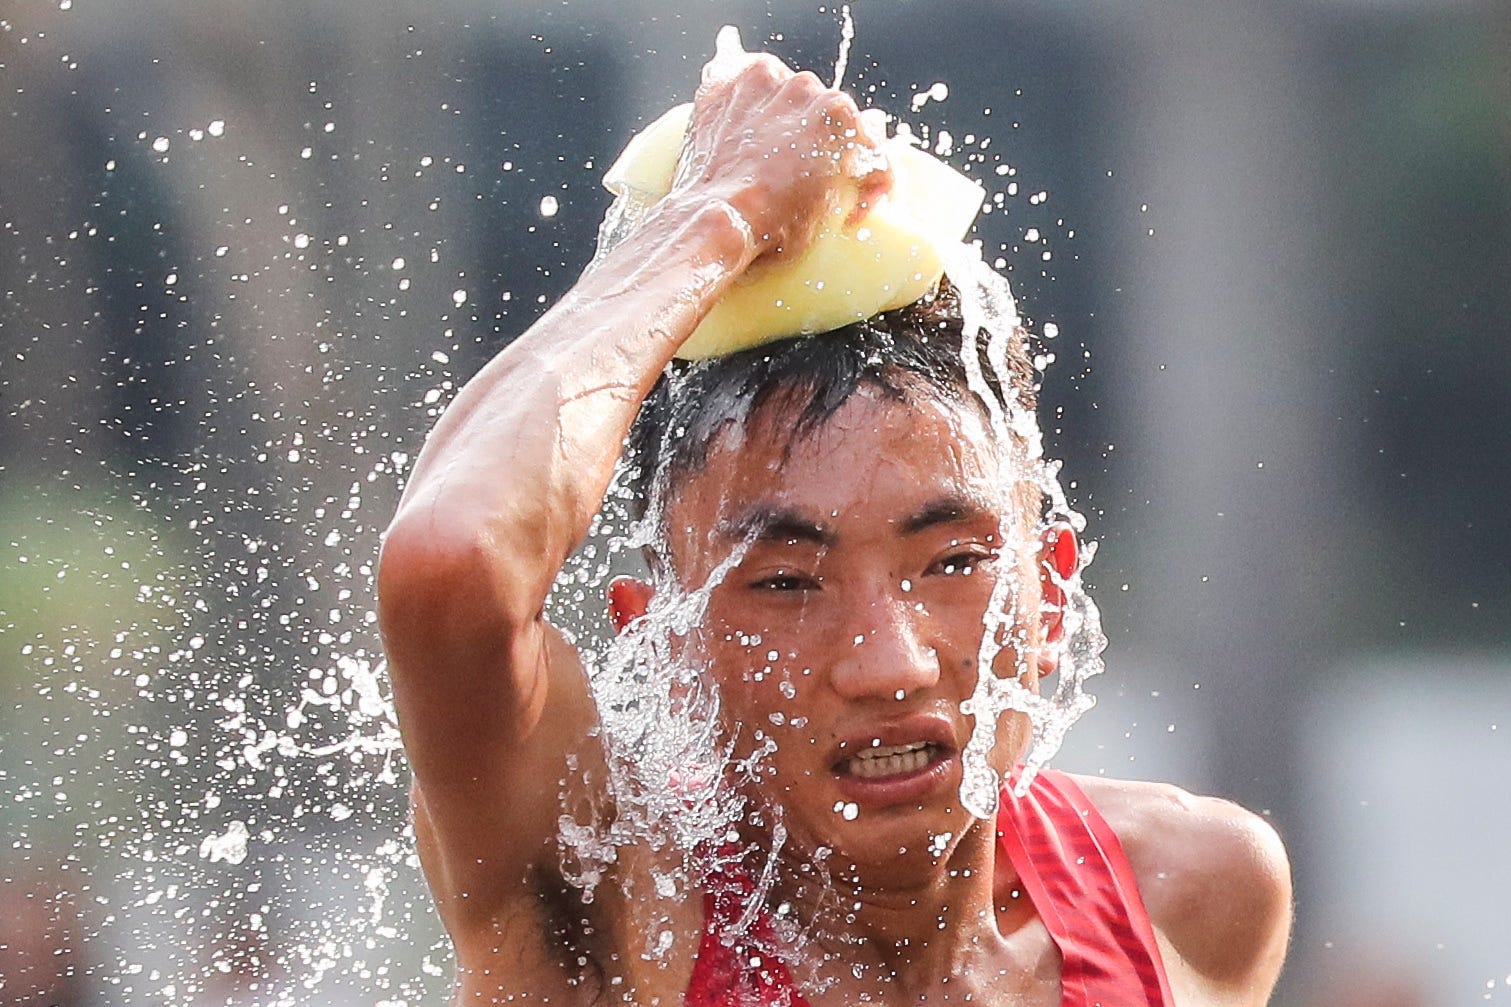 Duo Bujie of China cools off during the men's marathon at the 18th Asian Games in Jakarta, Indonesia.